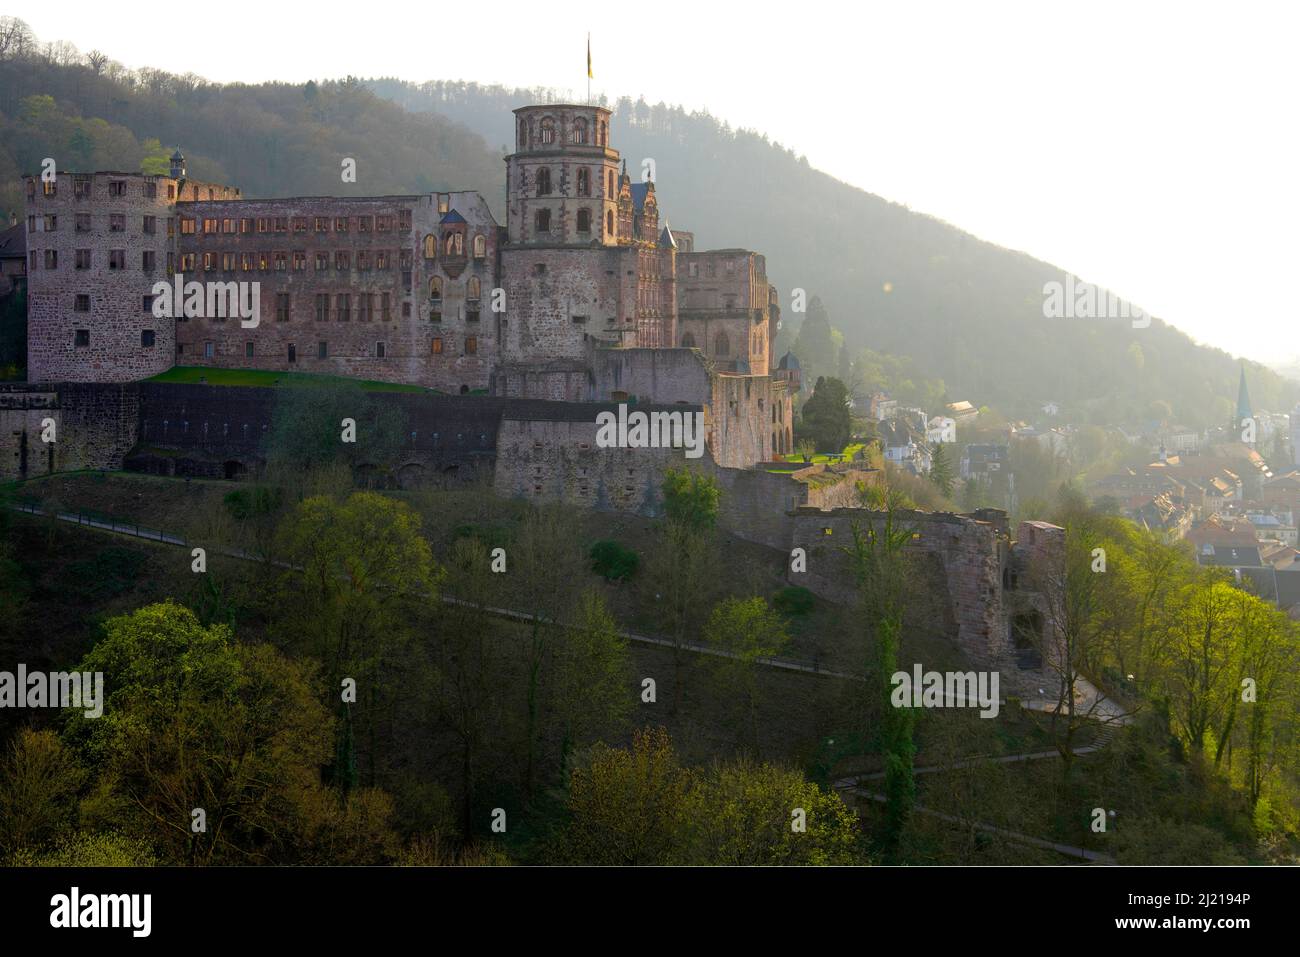 Elevated view of medieval Heidelberg town. Heidelberg is a town on the Neckar river in Baden-Württemberg, southwestern Germany. Stock Photo